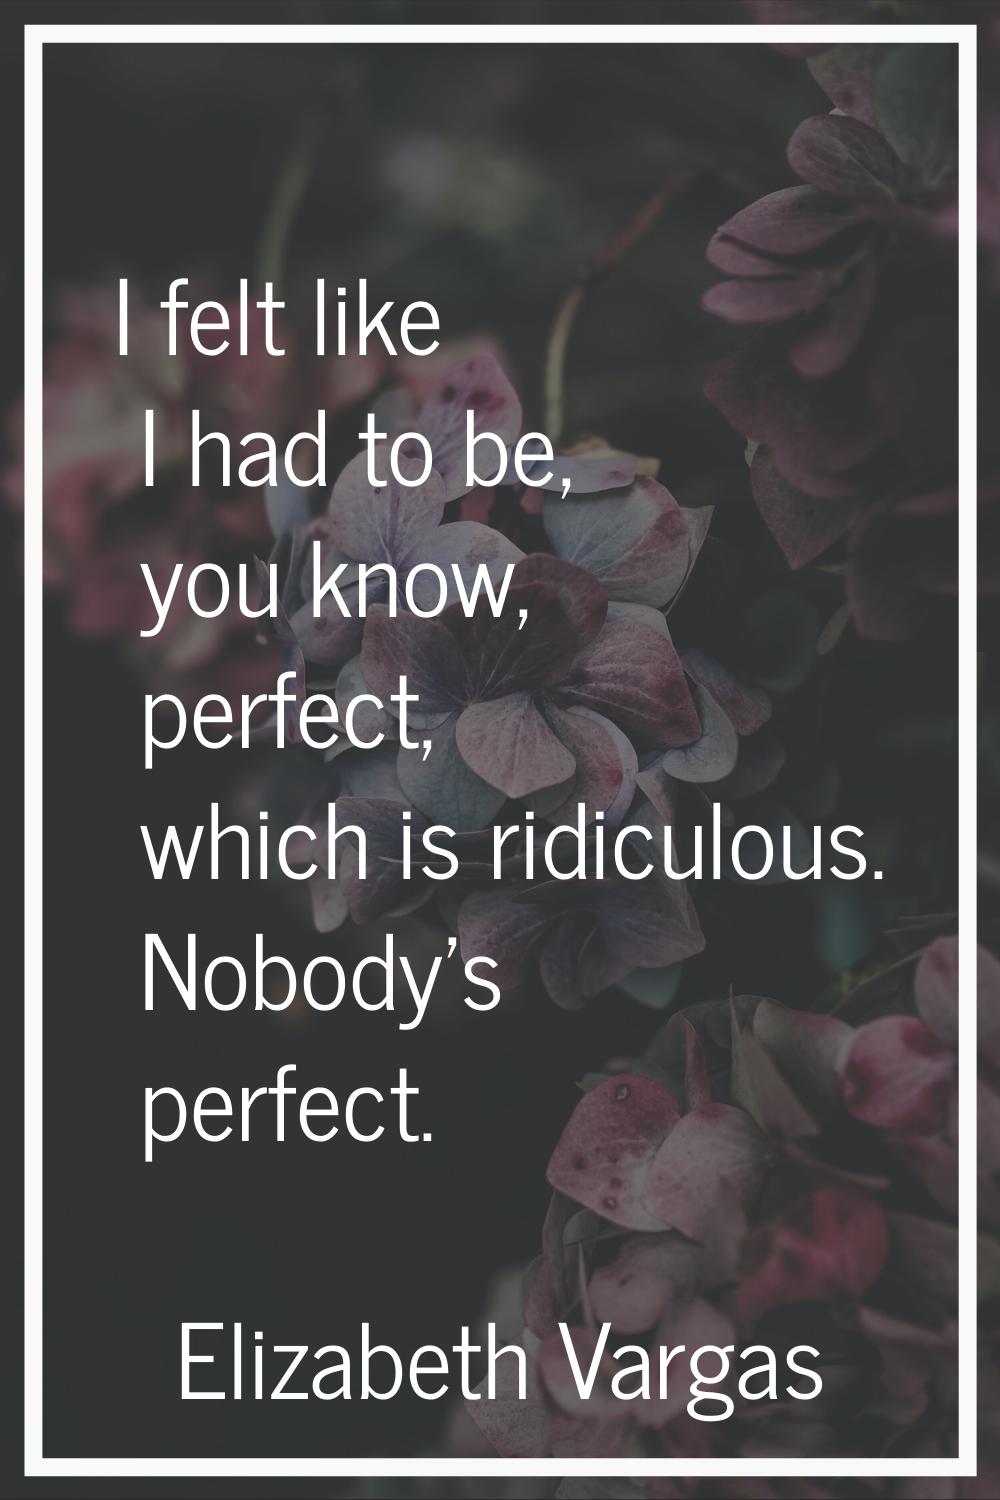 I felt like I had to be, you know, perfect, which is ridiculous. Nobody's perfect.